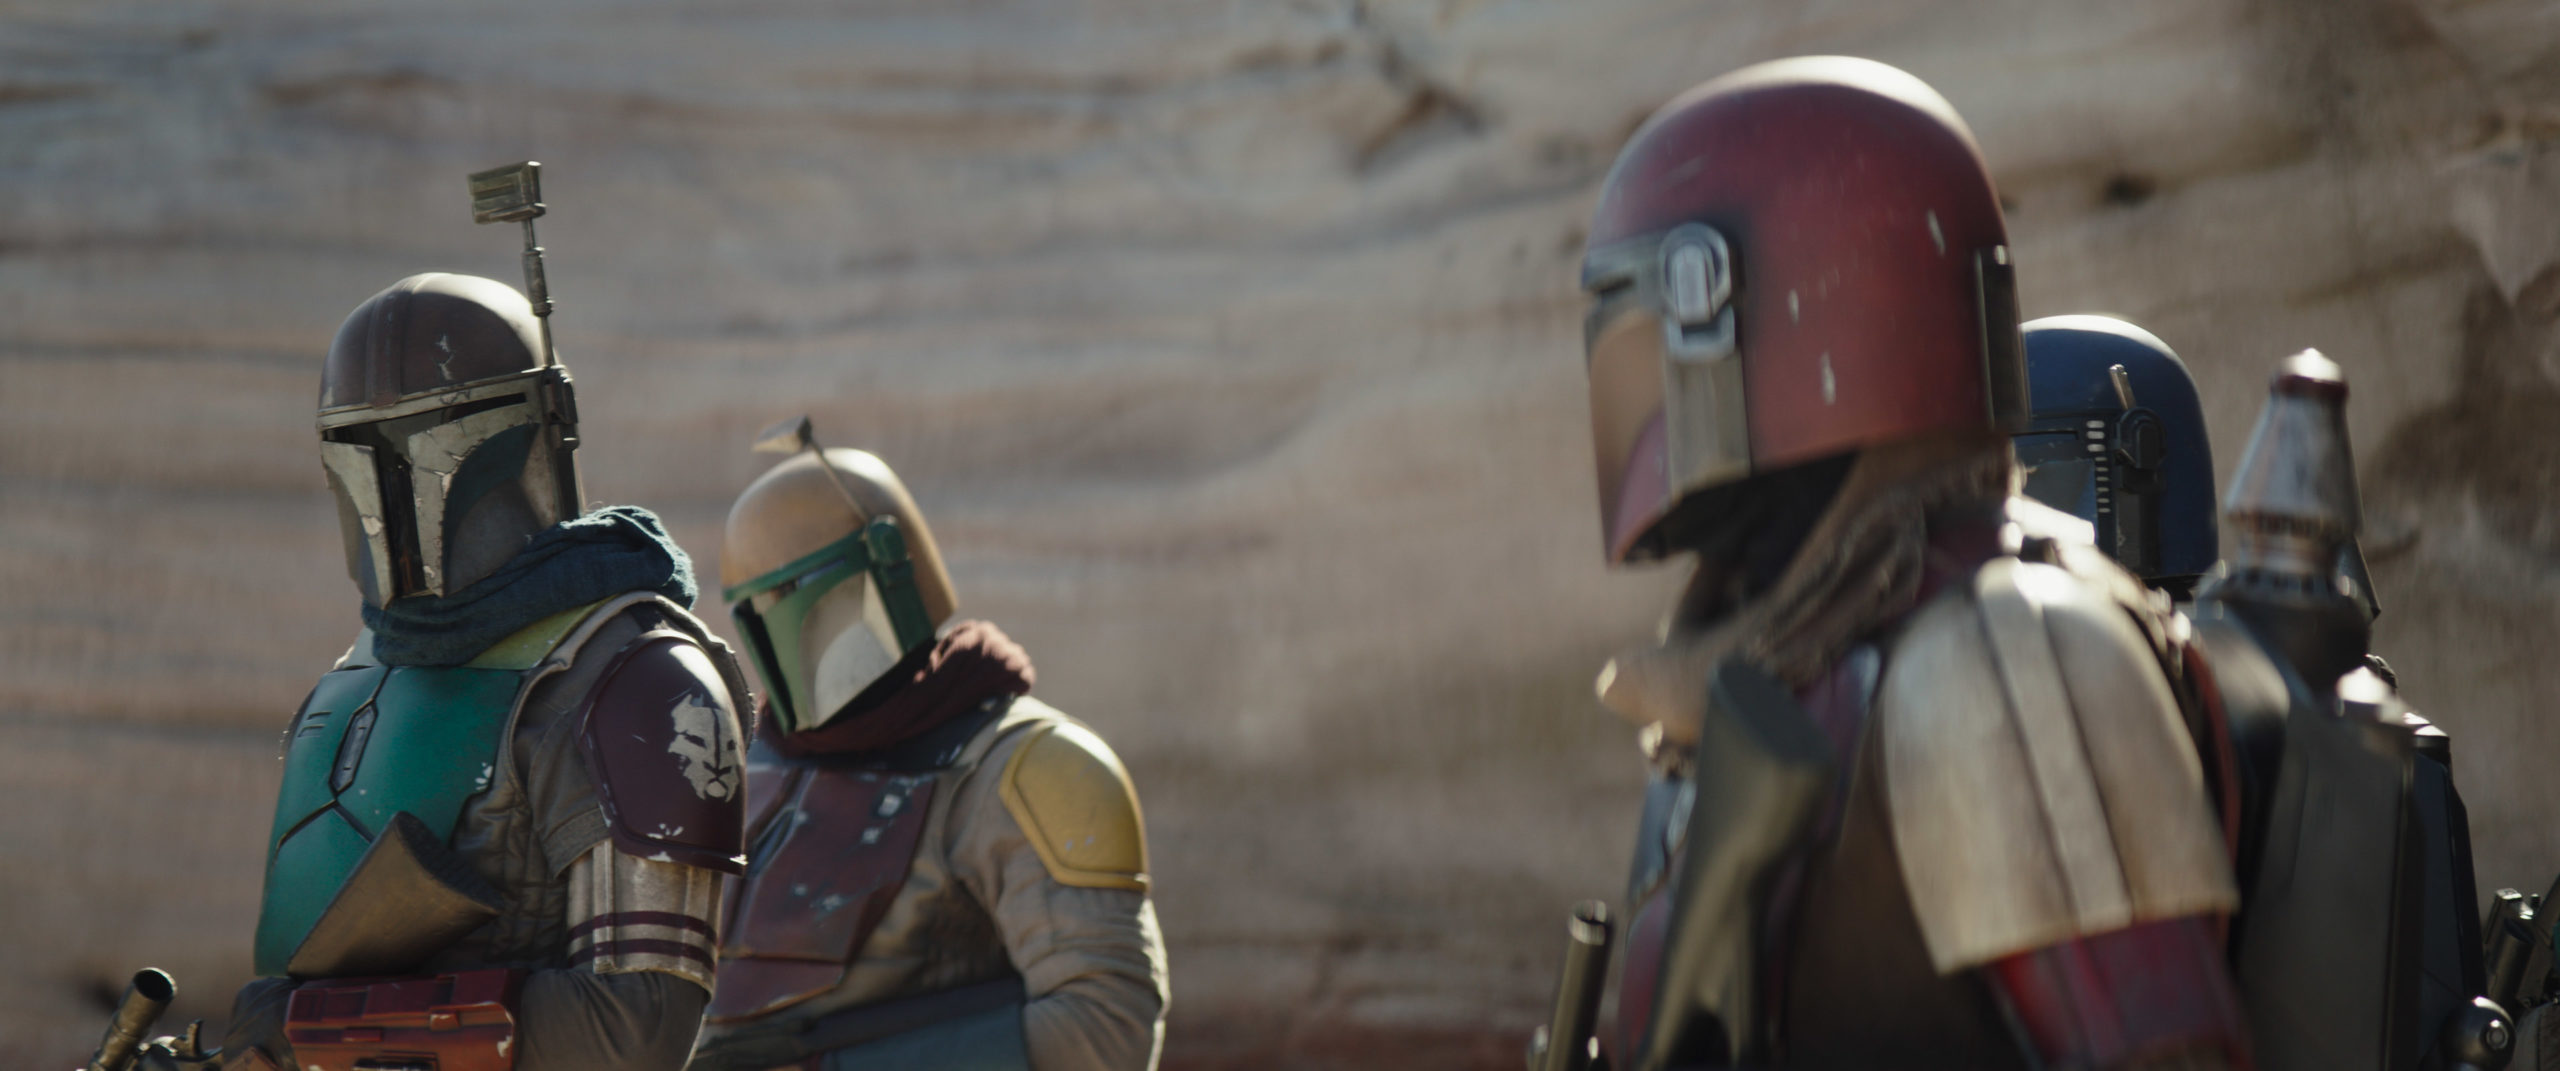 Pascal Teases More Mandalorians And More Battlles In Mando S3